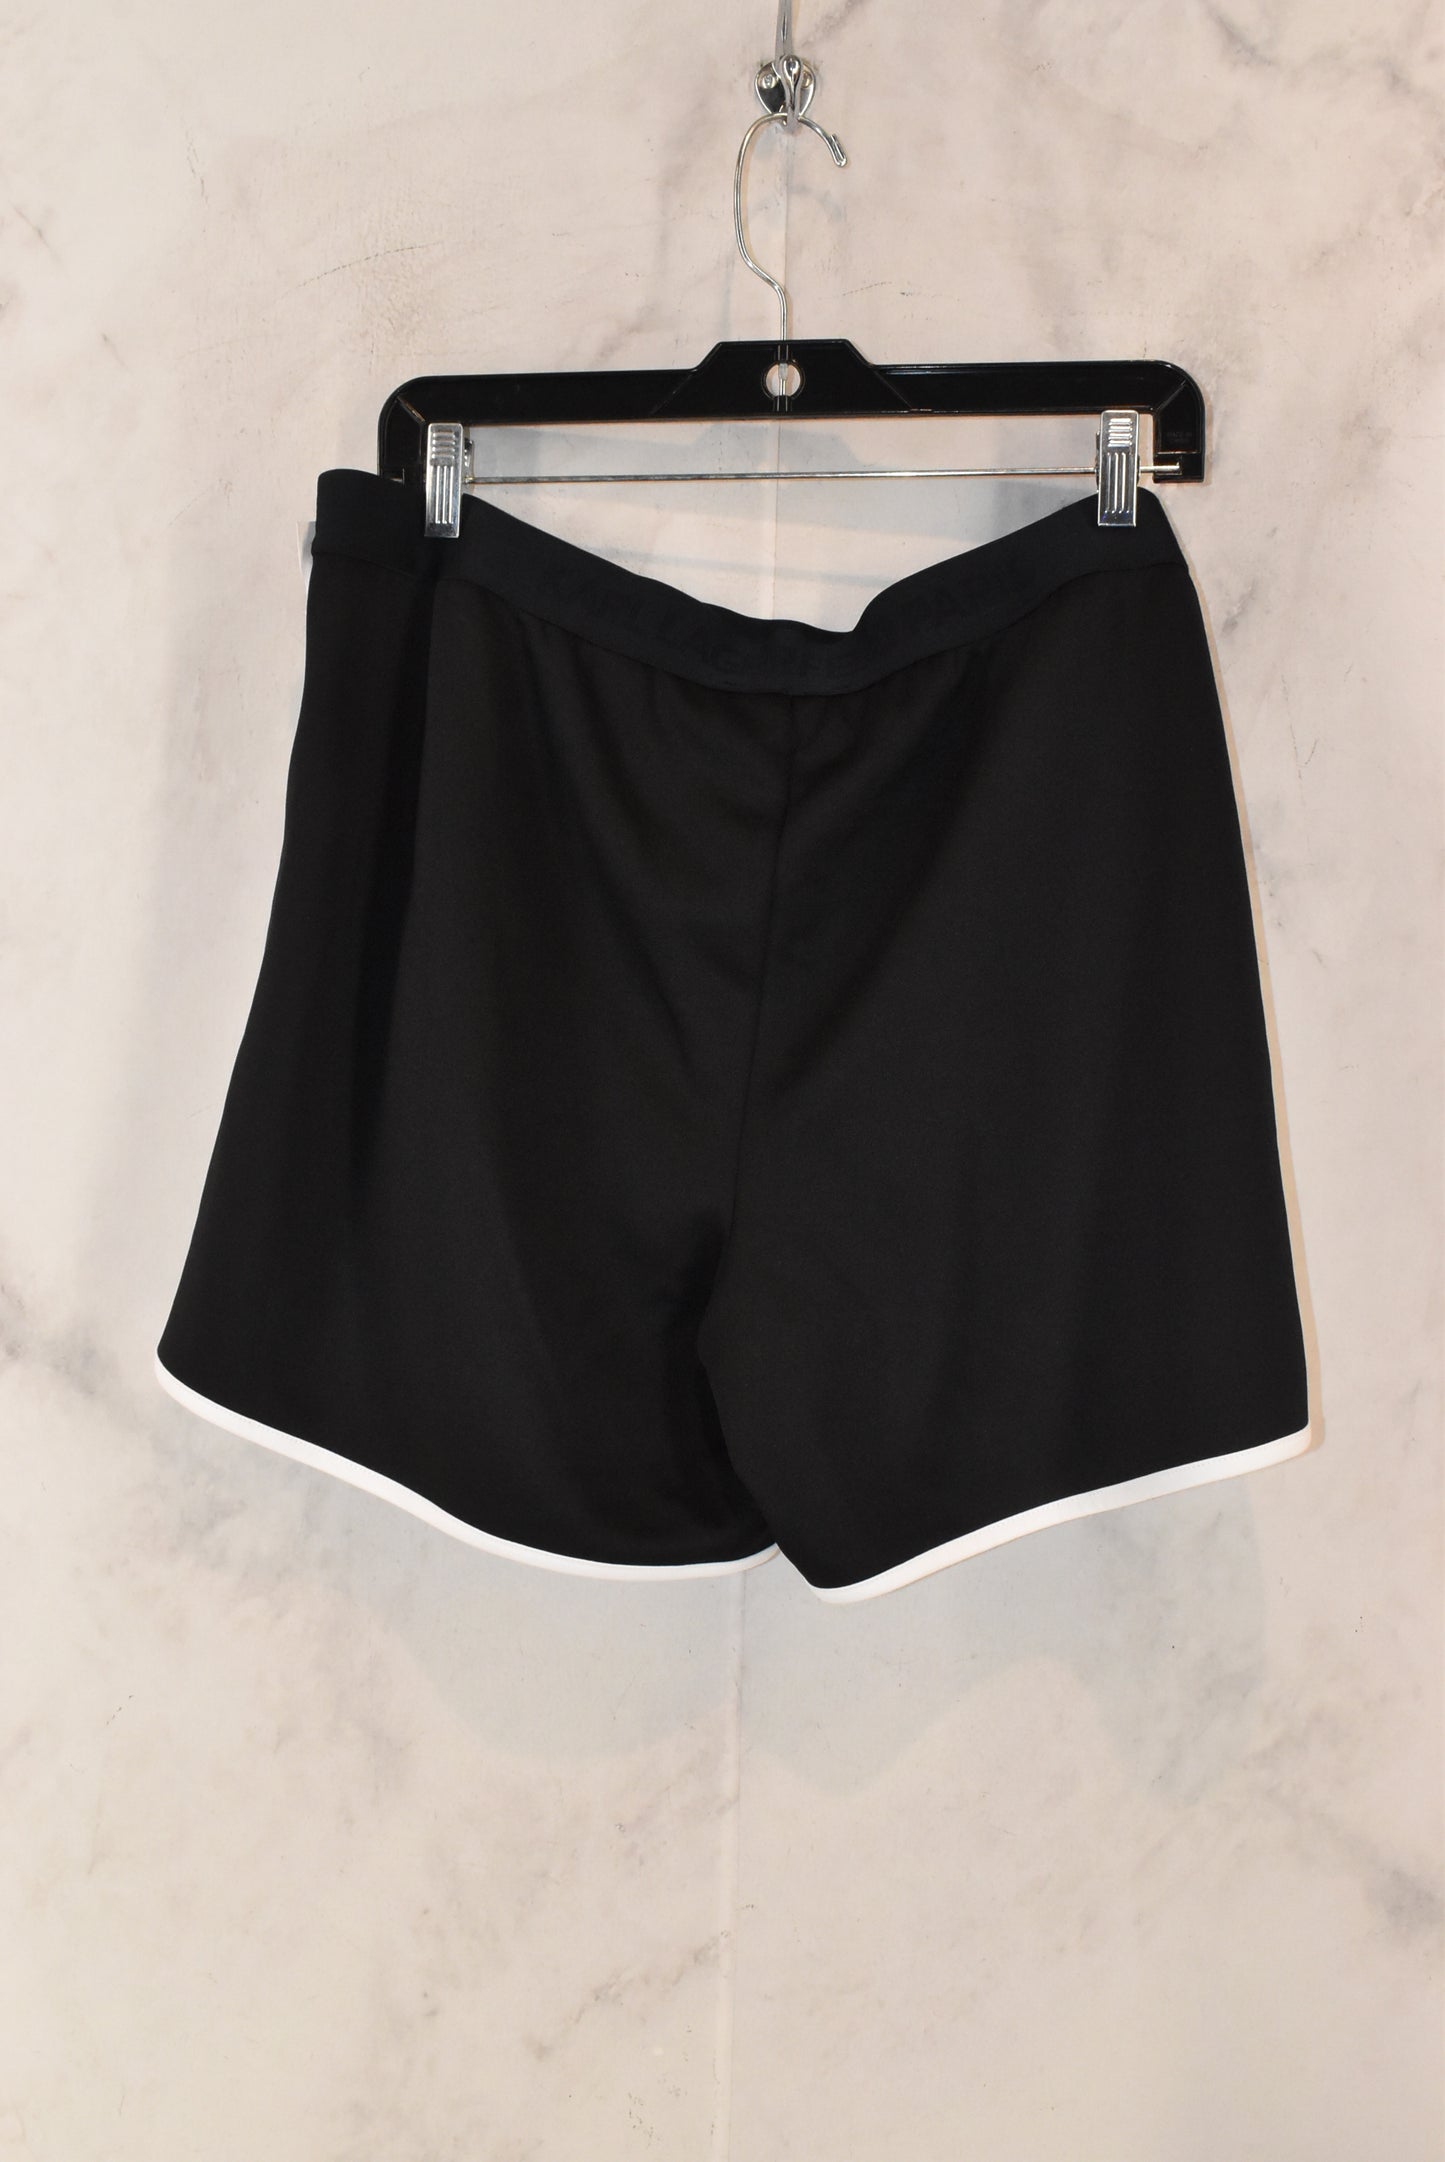 Athletic Shorts By Karl Lagerfeld  Size: Xl